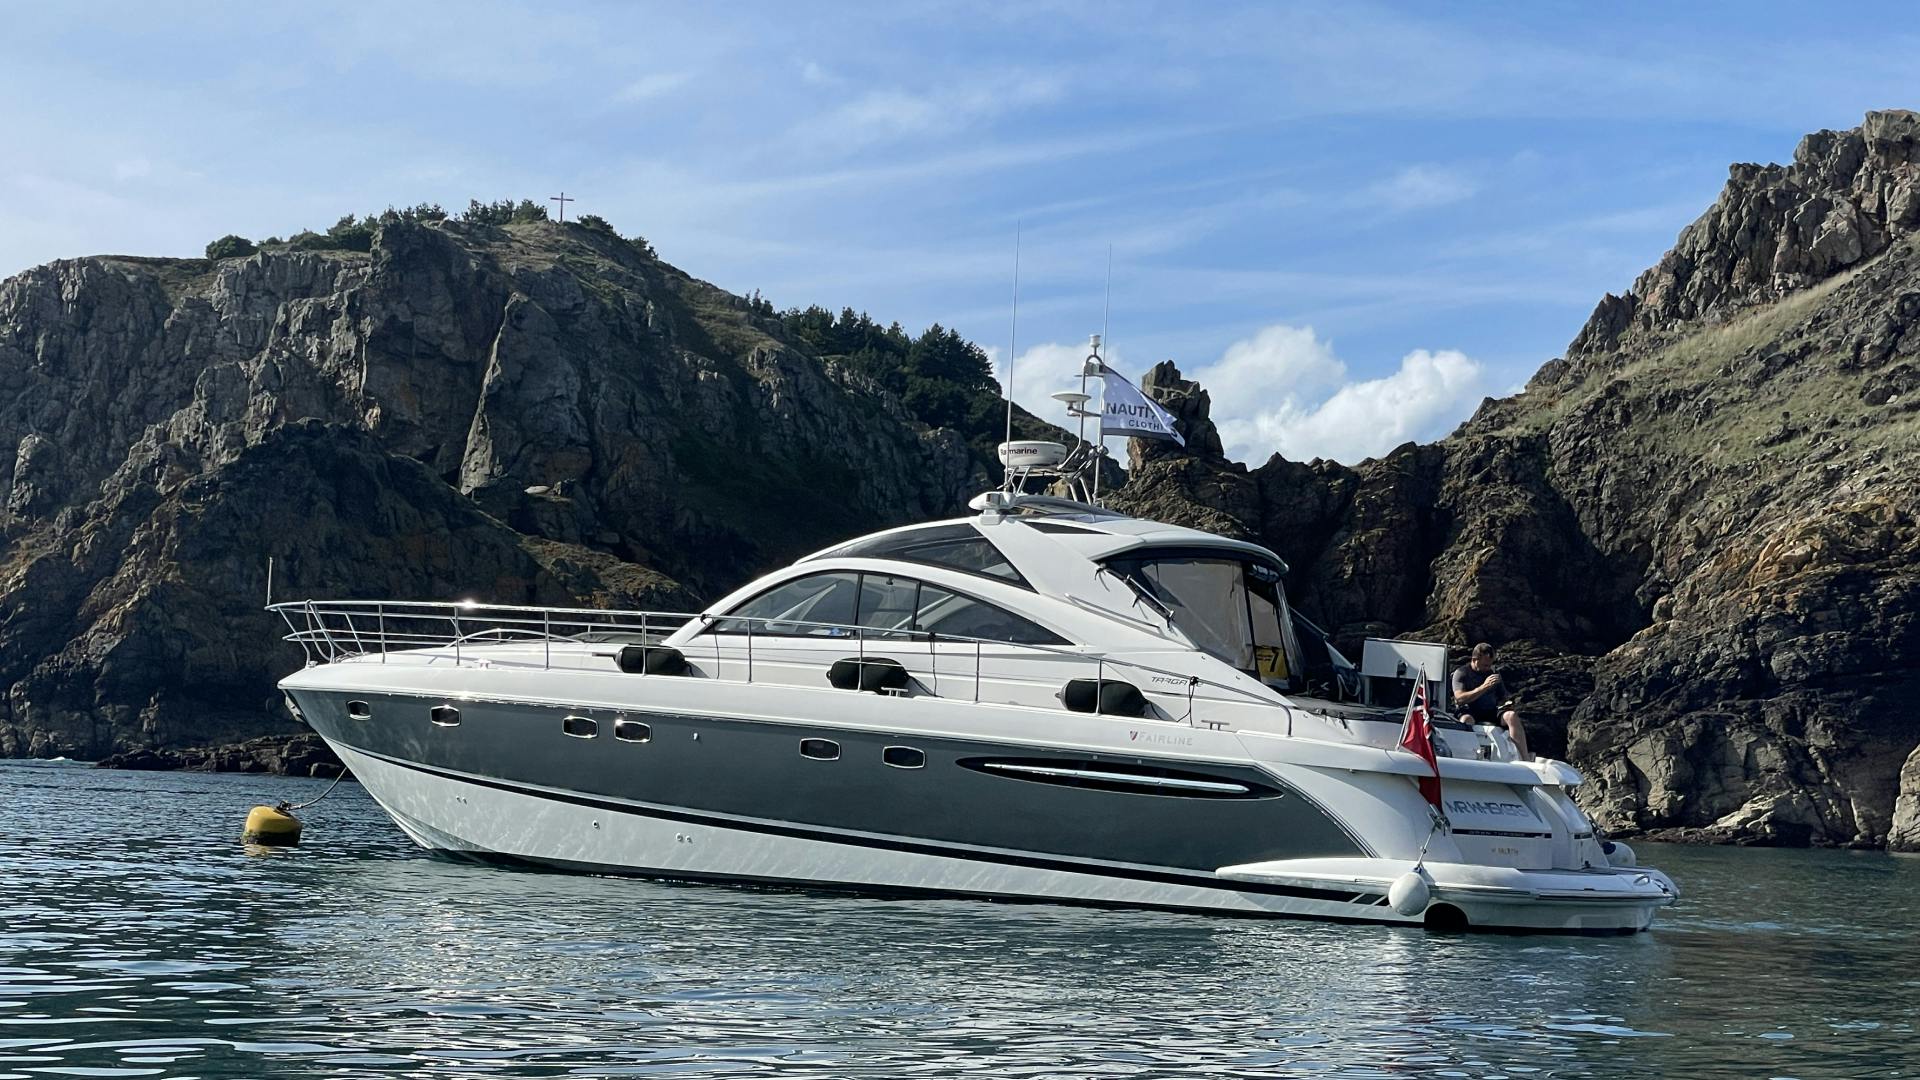 Mr. Whiskers - Powerboat charter out of Weymouth